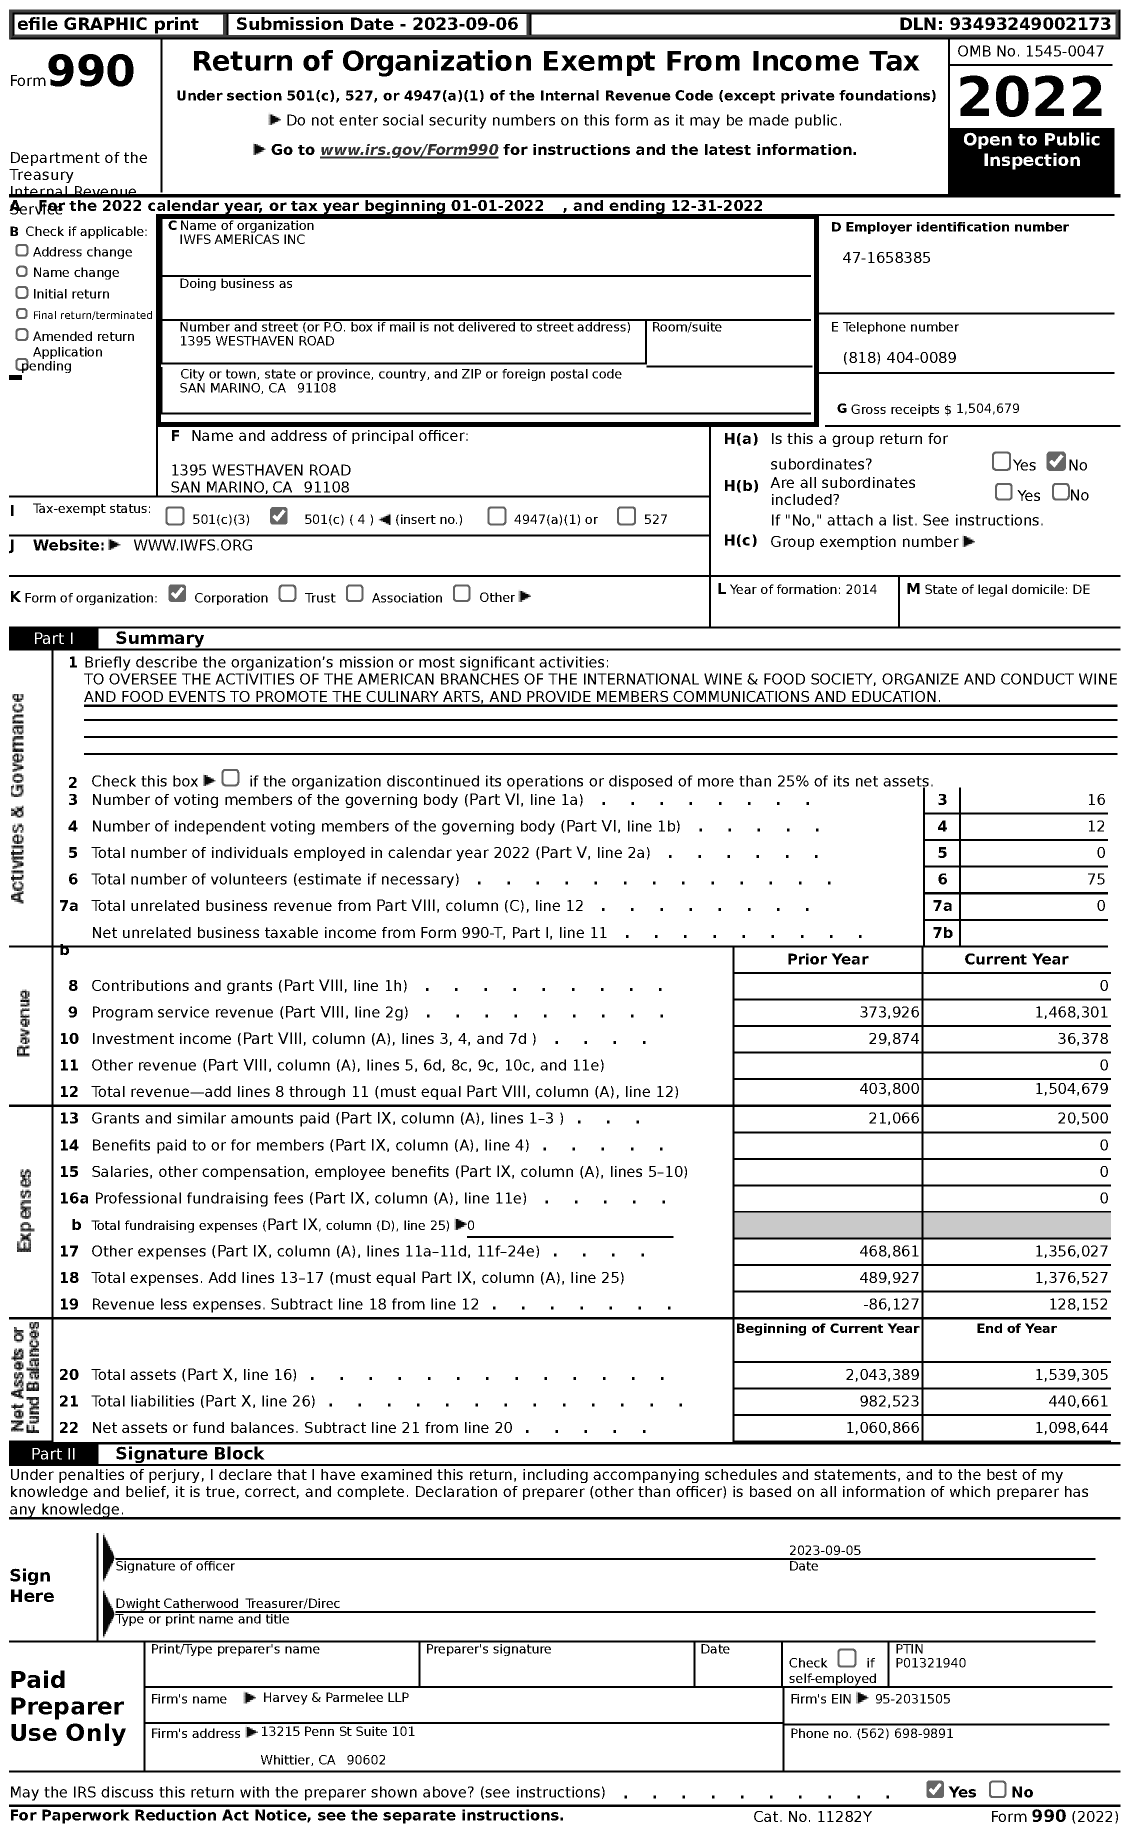 Image of first page of 2022 Form 990 for Iwfs Americas